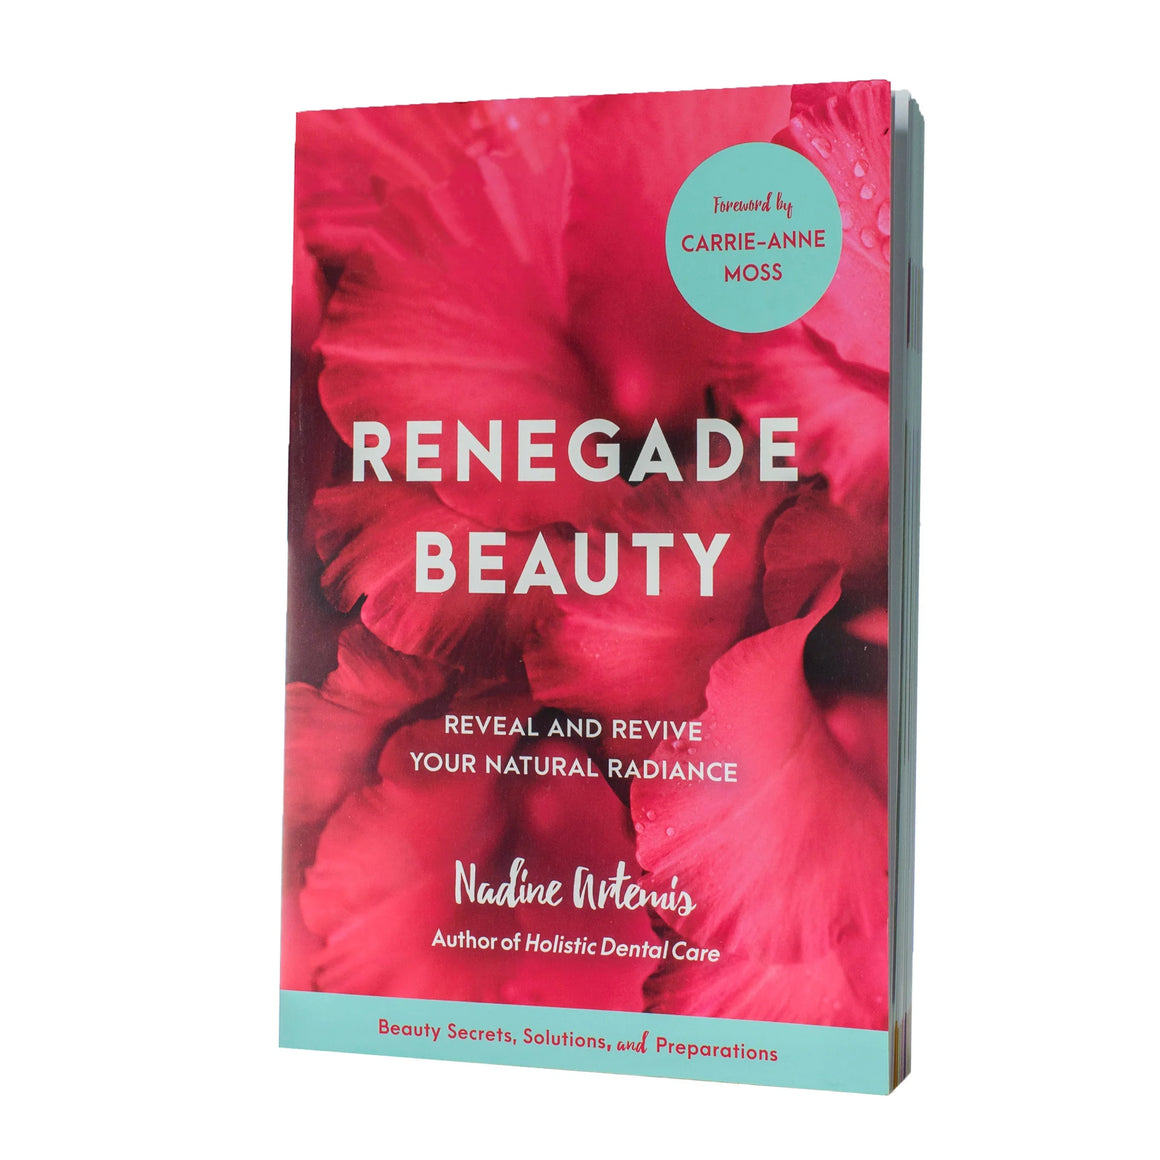 Renegade Beauty: Reveal and Revive Your Natural Radiance